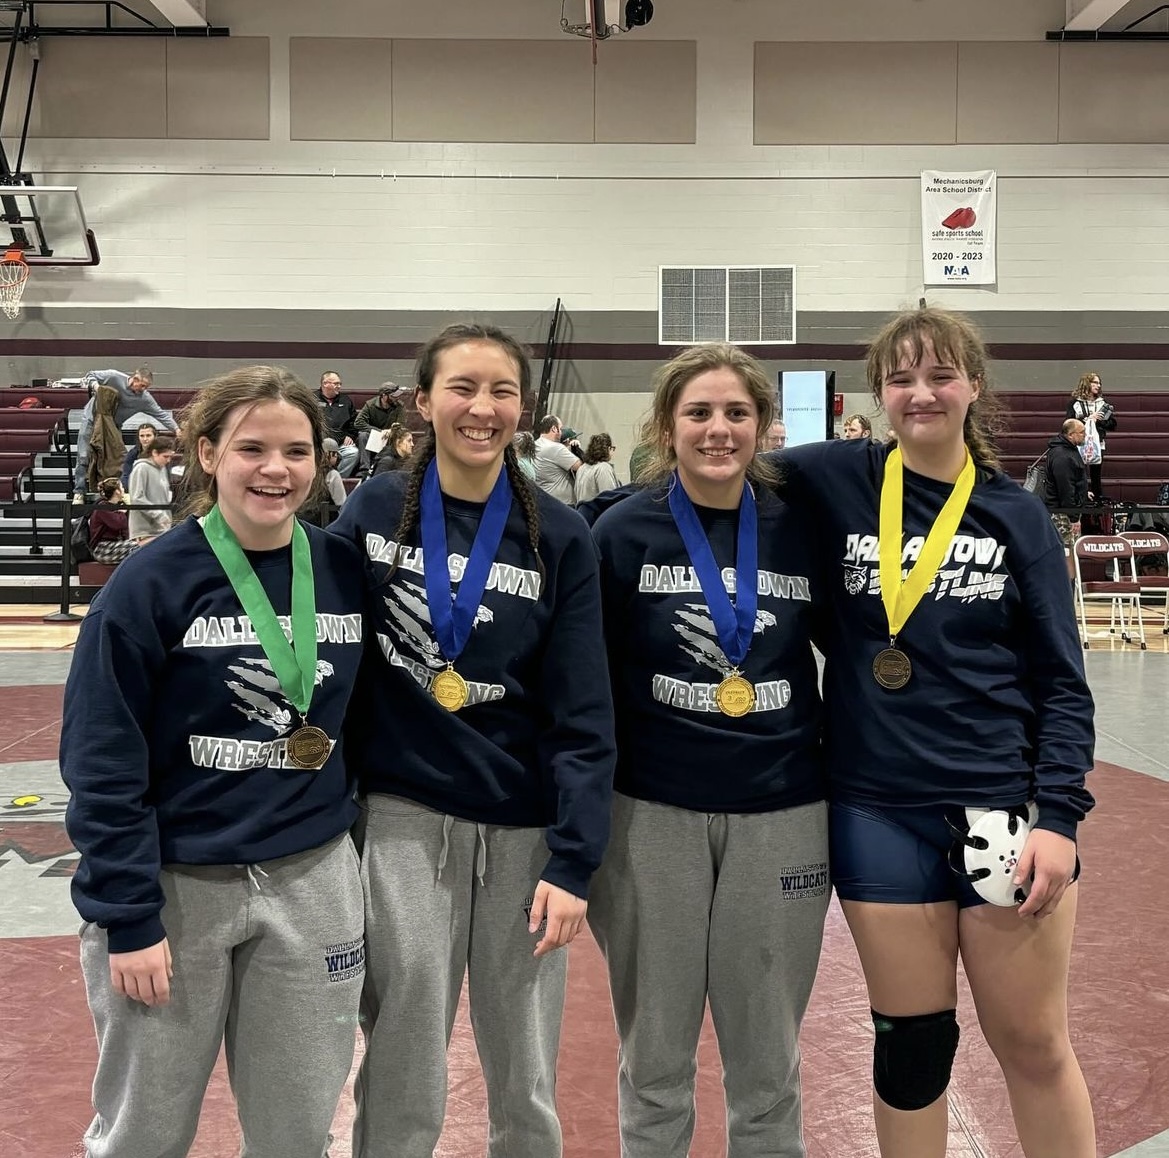 Avery+Baldwin%2C+Kenna+Hoffman%2C+Shelly+Gipson-McDonald%2C+and+Tessa+Henise+%28left+to+right%29+posing+with+their+medals+after+representing+Dallastown+at+sectionals.+Baldwin+and+Hoffman+went+on+to+qualify+for+the+PIAA+tournament.++Photo+via+Dallastown+Girls+Wrestling+Instagram.+